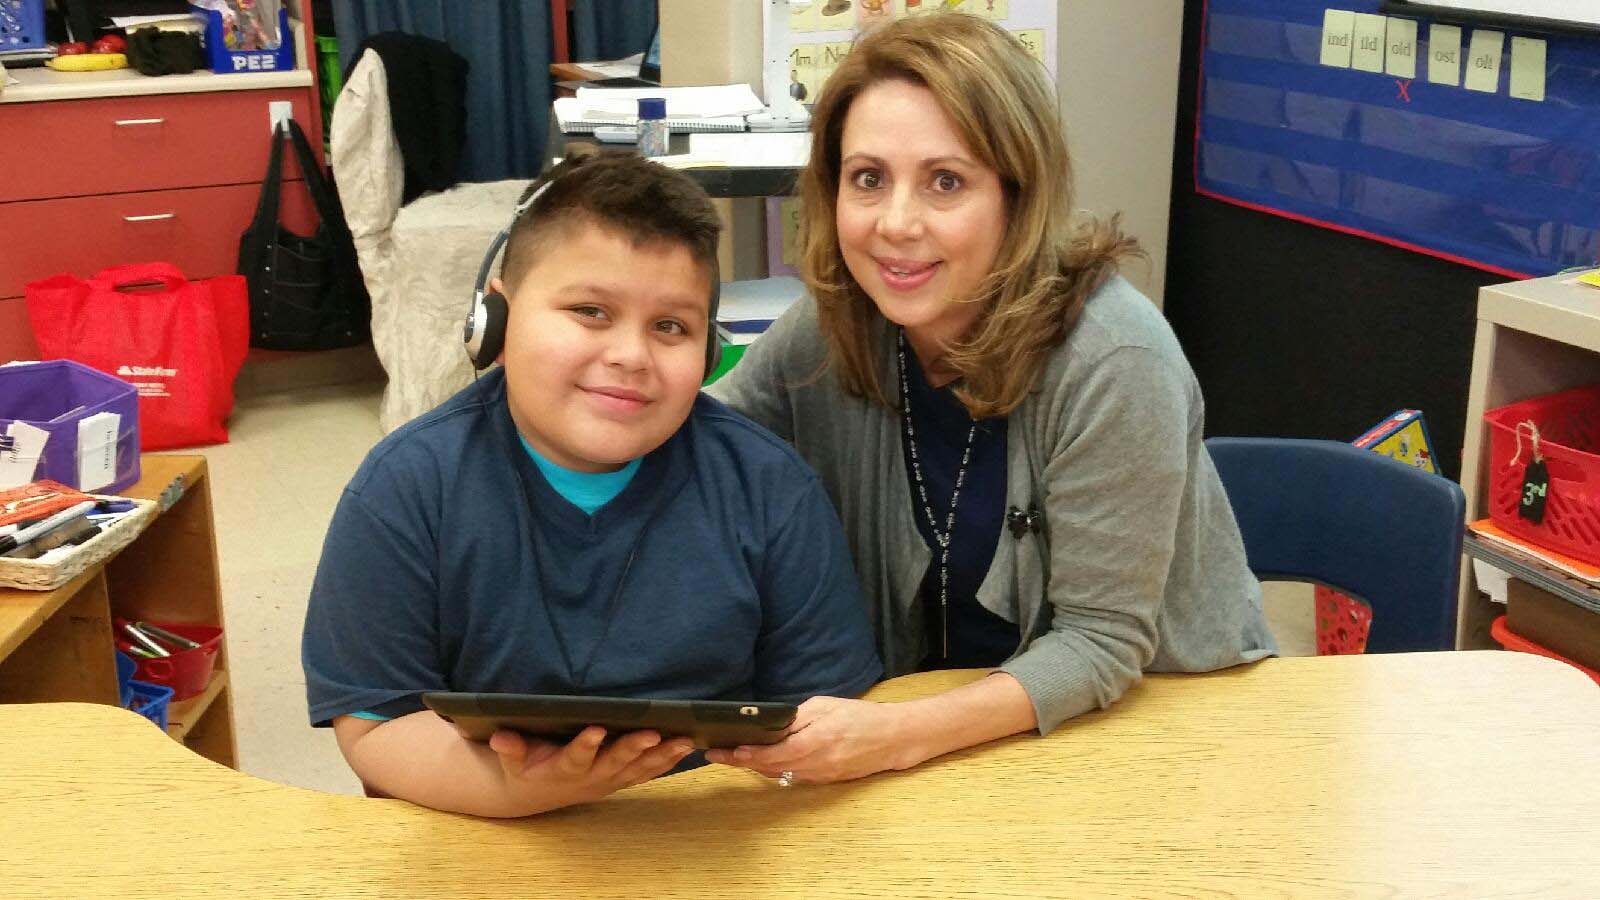 Mrs. Reyes sitting with a student in class. He has headphones on and is reading a tablet.